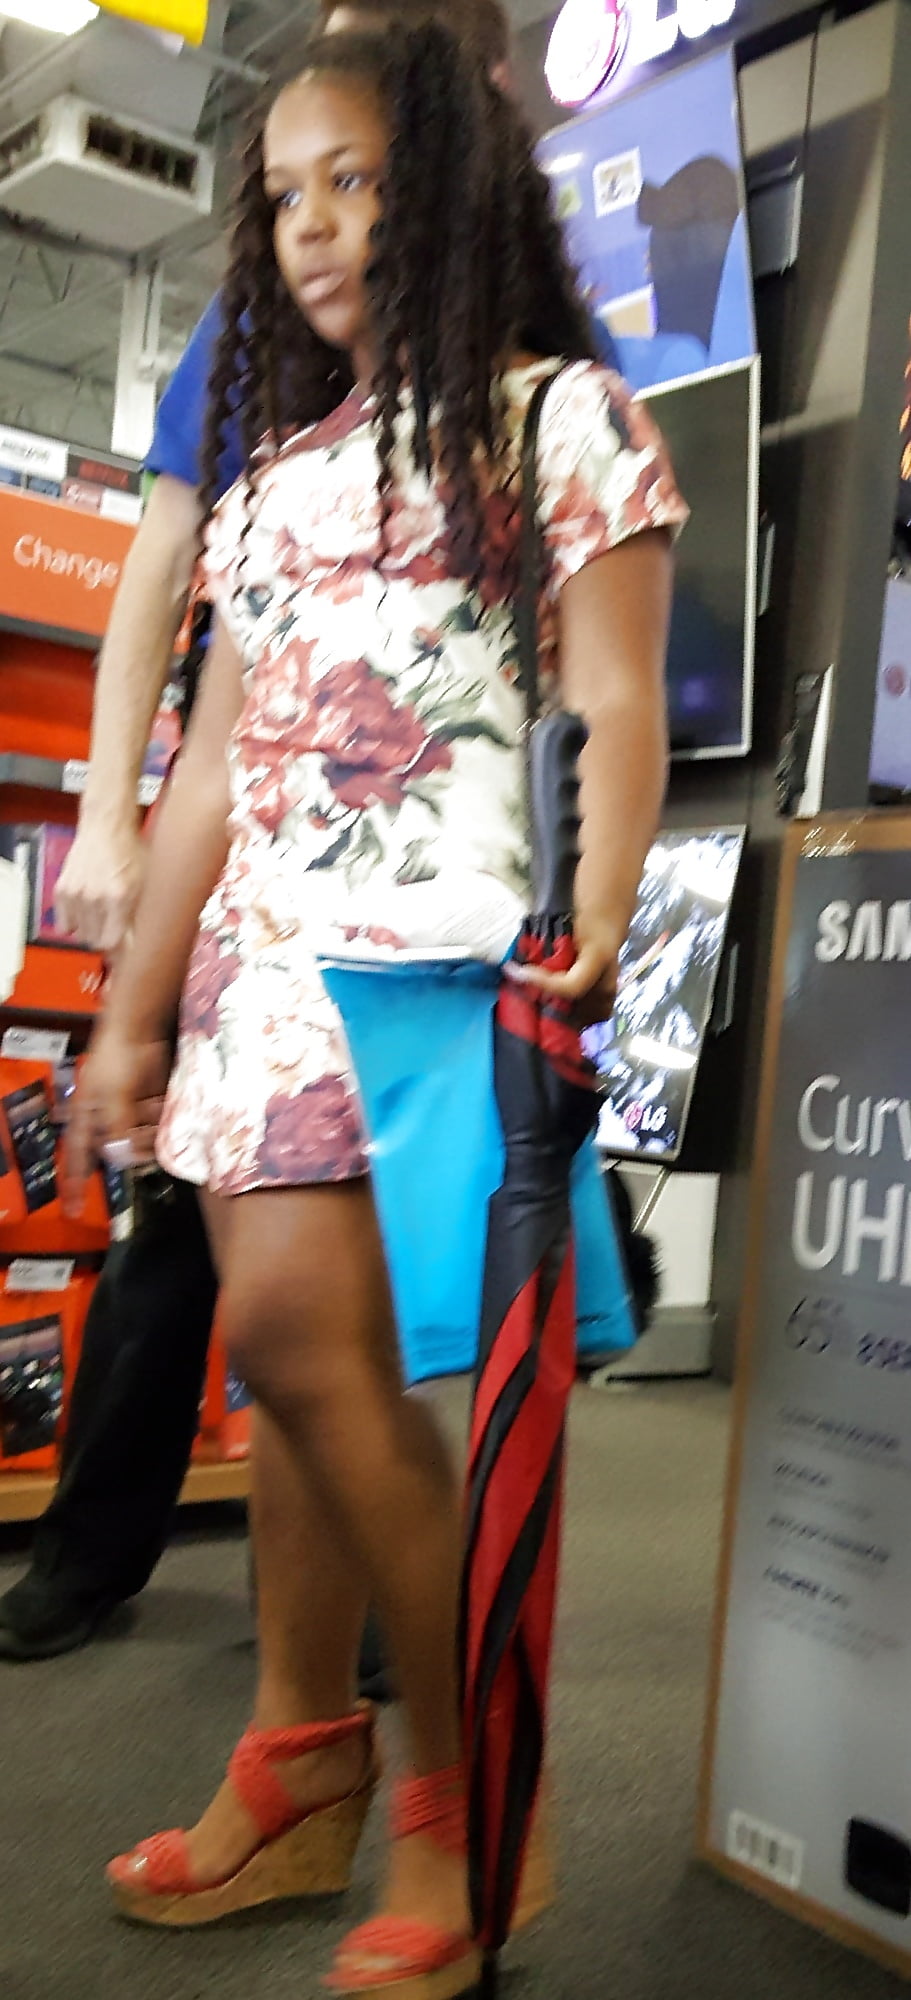 Ebony_wife_shopping_for_hubby_in_thot_dress_Creep_Shots (10/18)